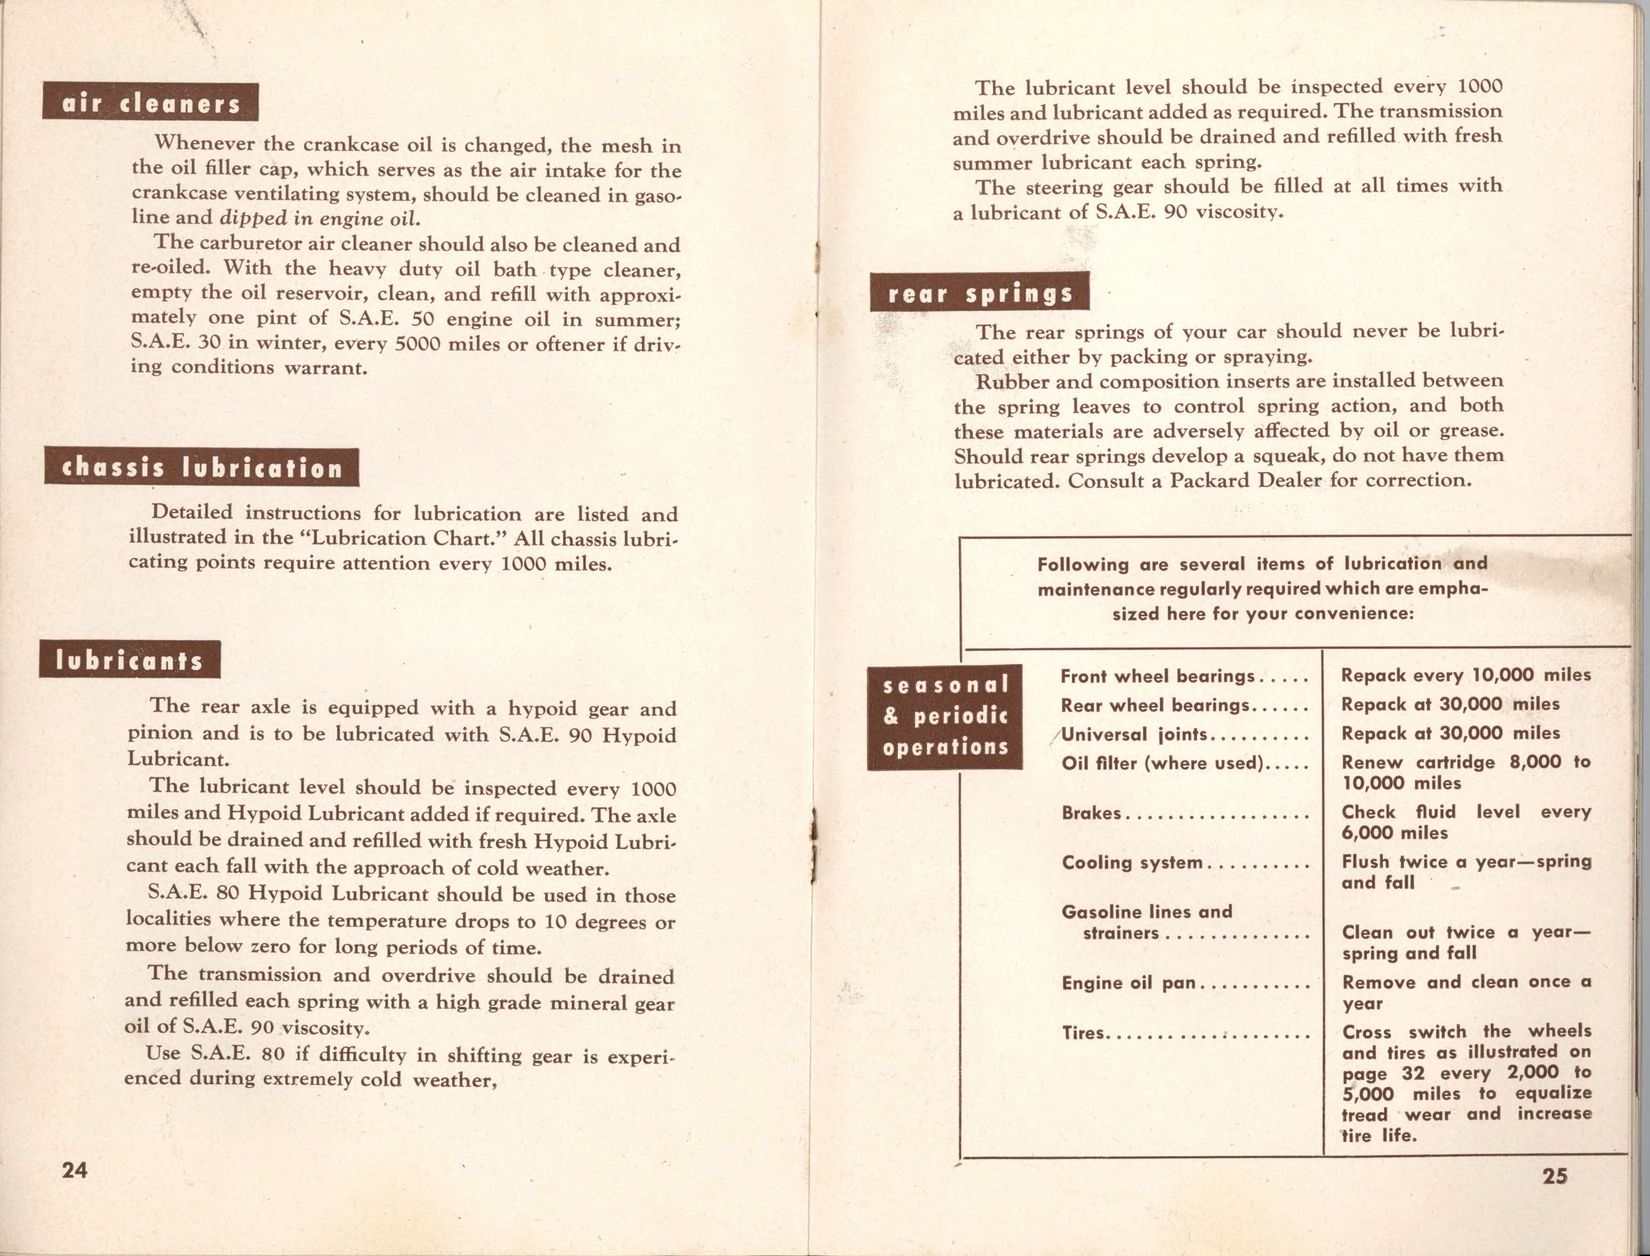 1948 Packard Owners Manual Page 5